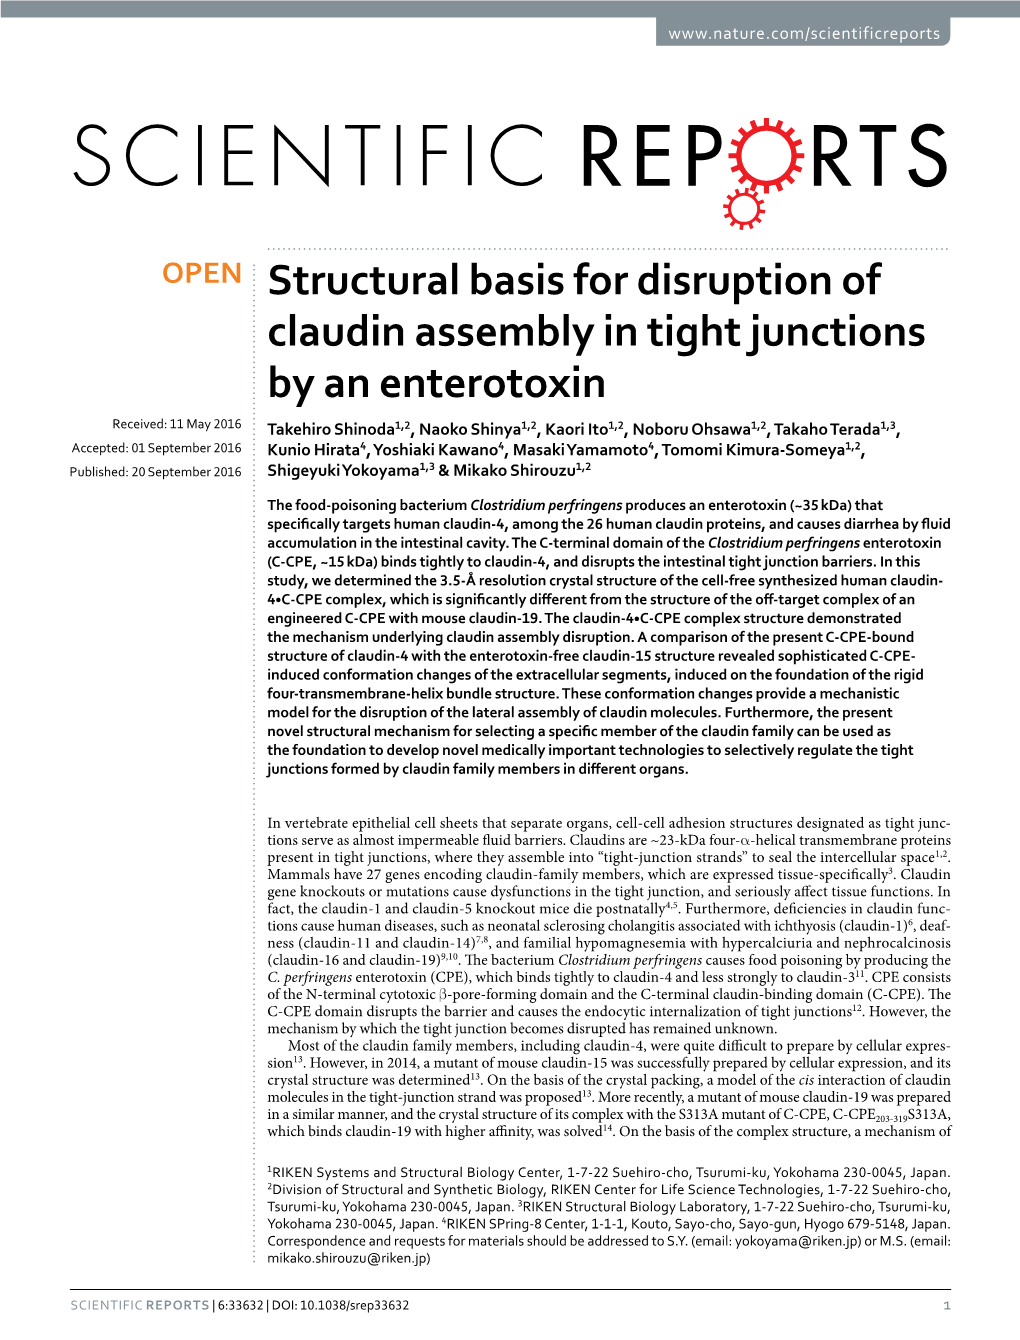 Structural Basis for Disruption of Claudin Assembly in Tight Junctions